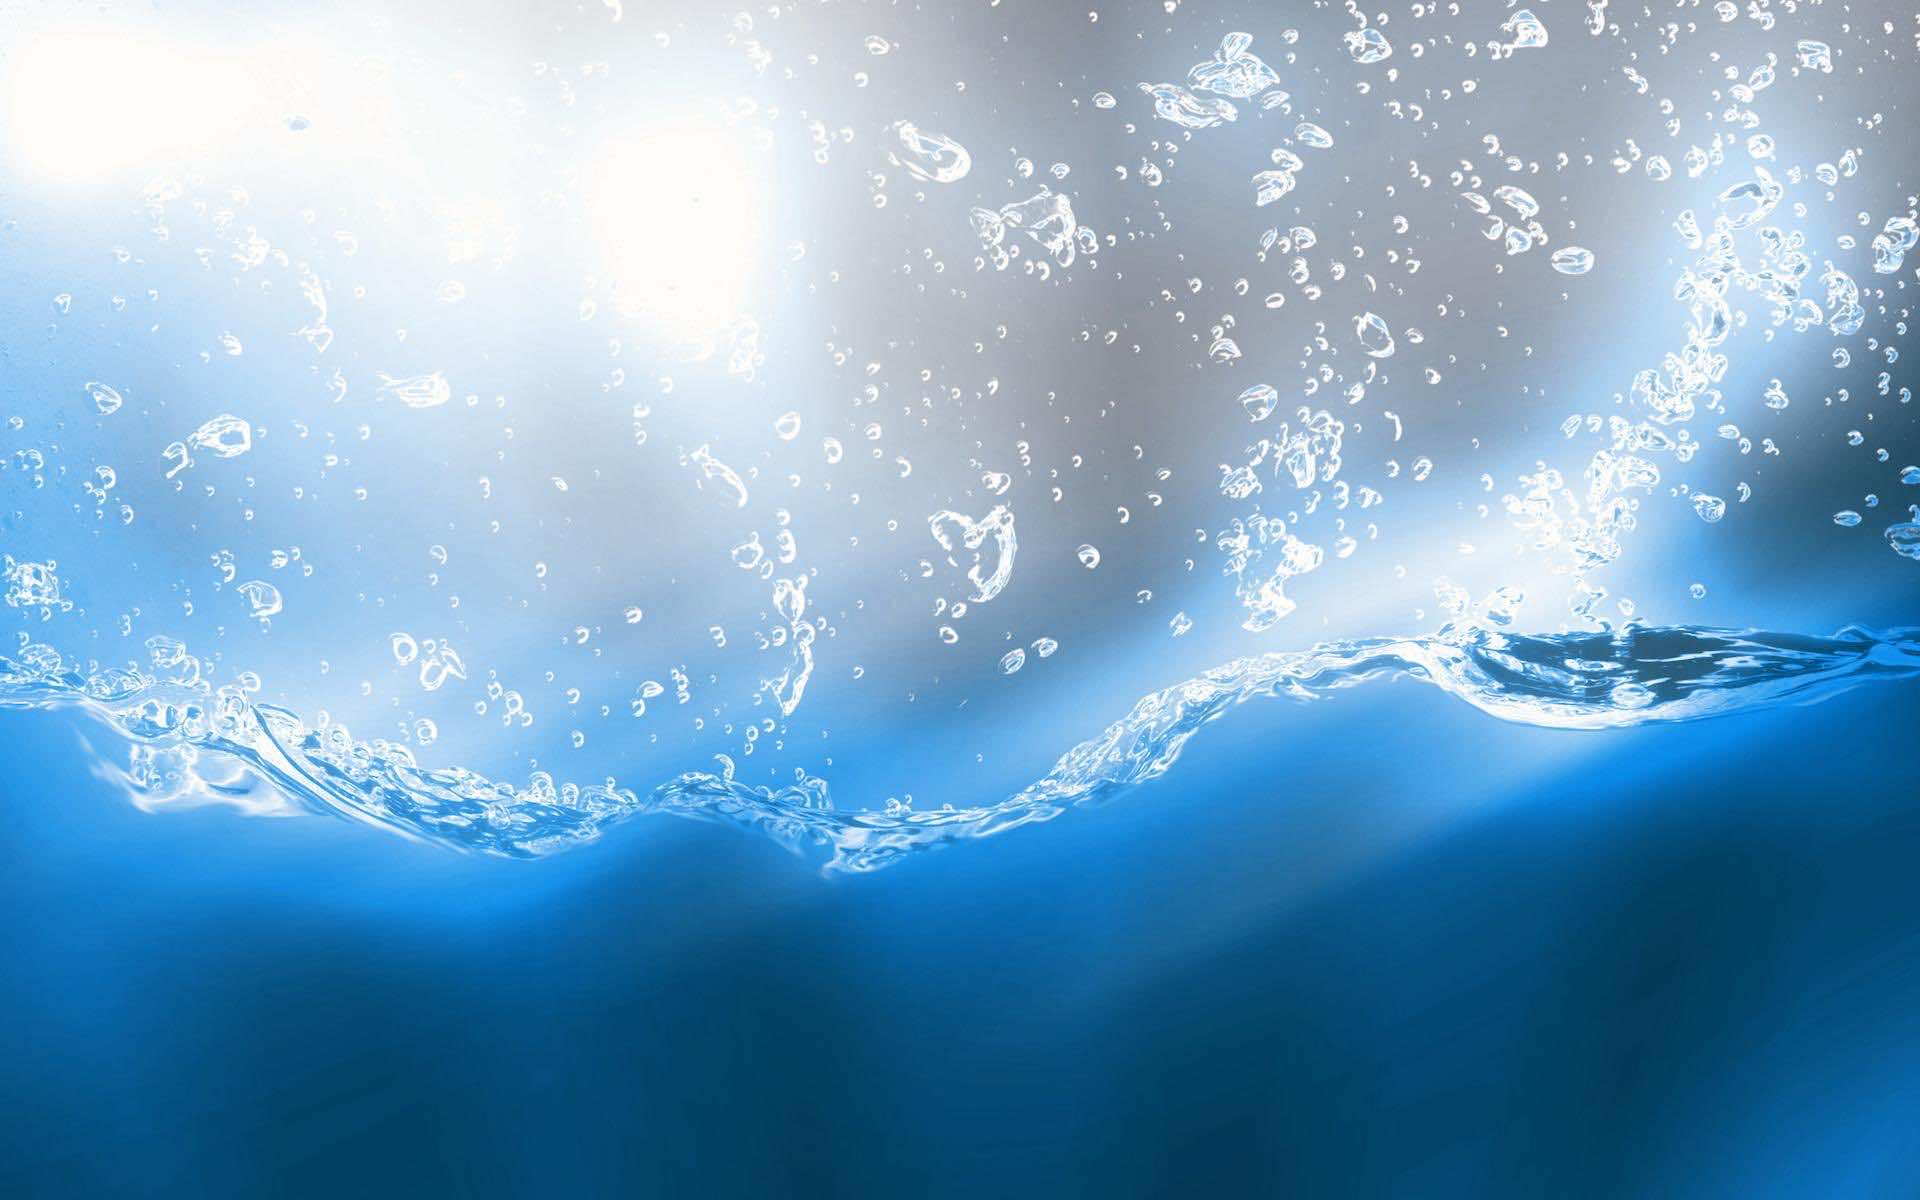 140+ HD Water Wallpaper Backgrounds For Mobile And Desktop